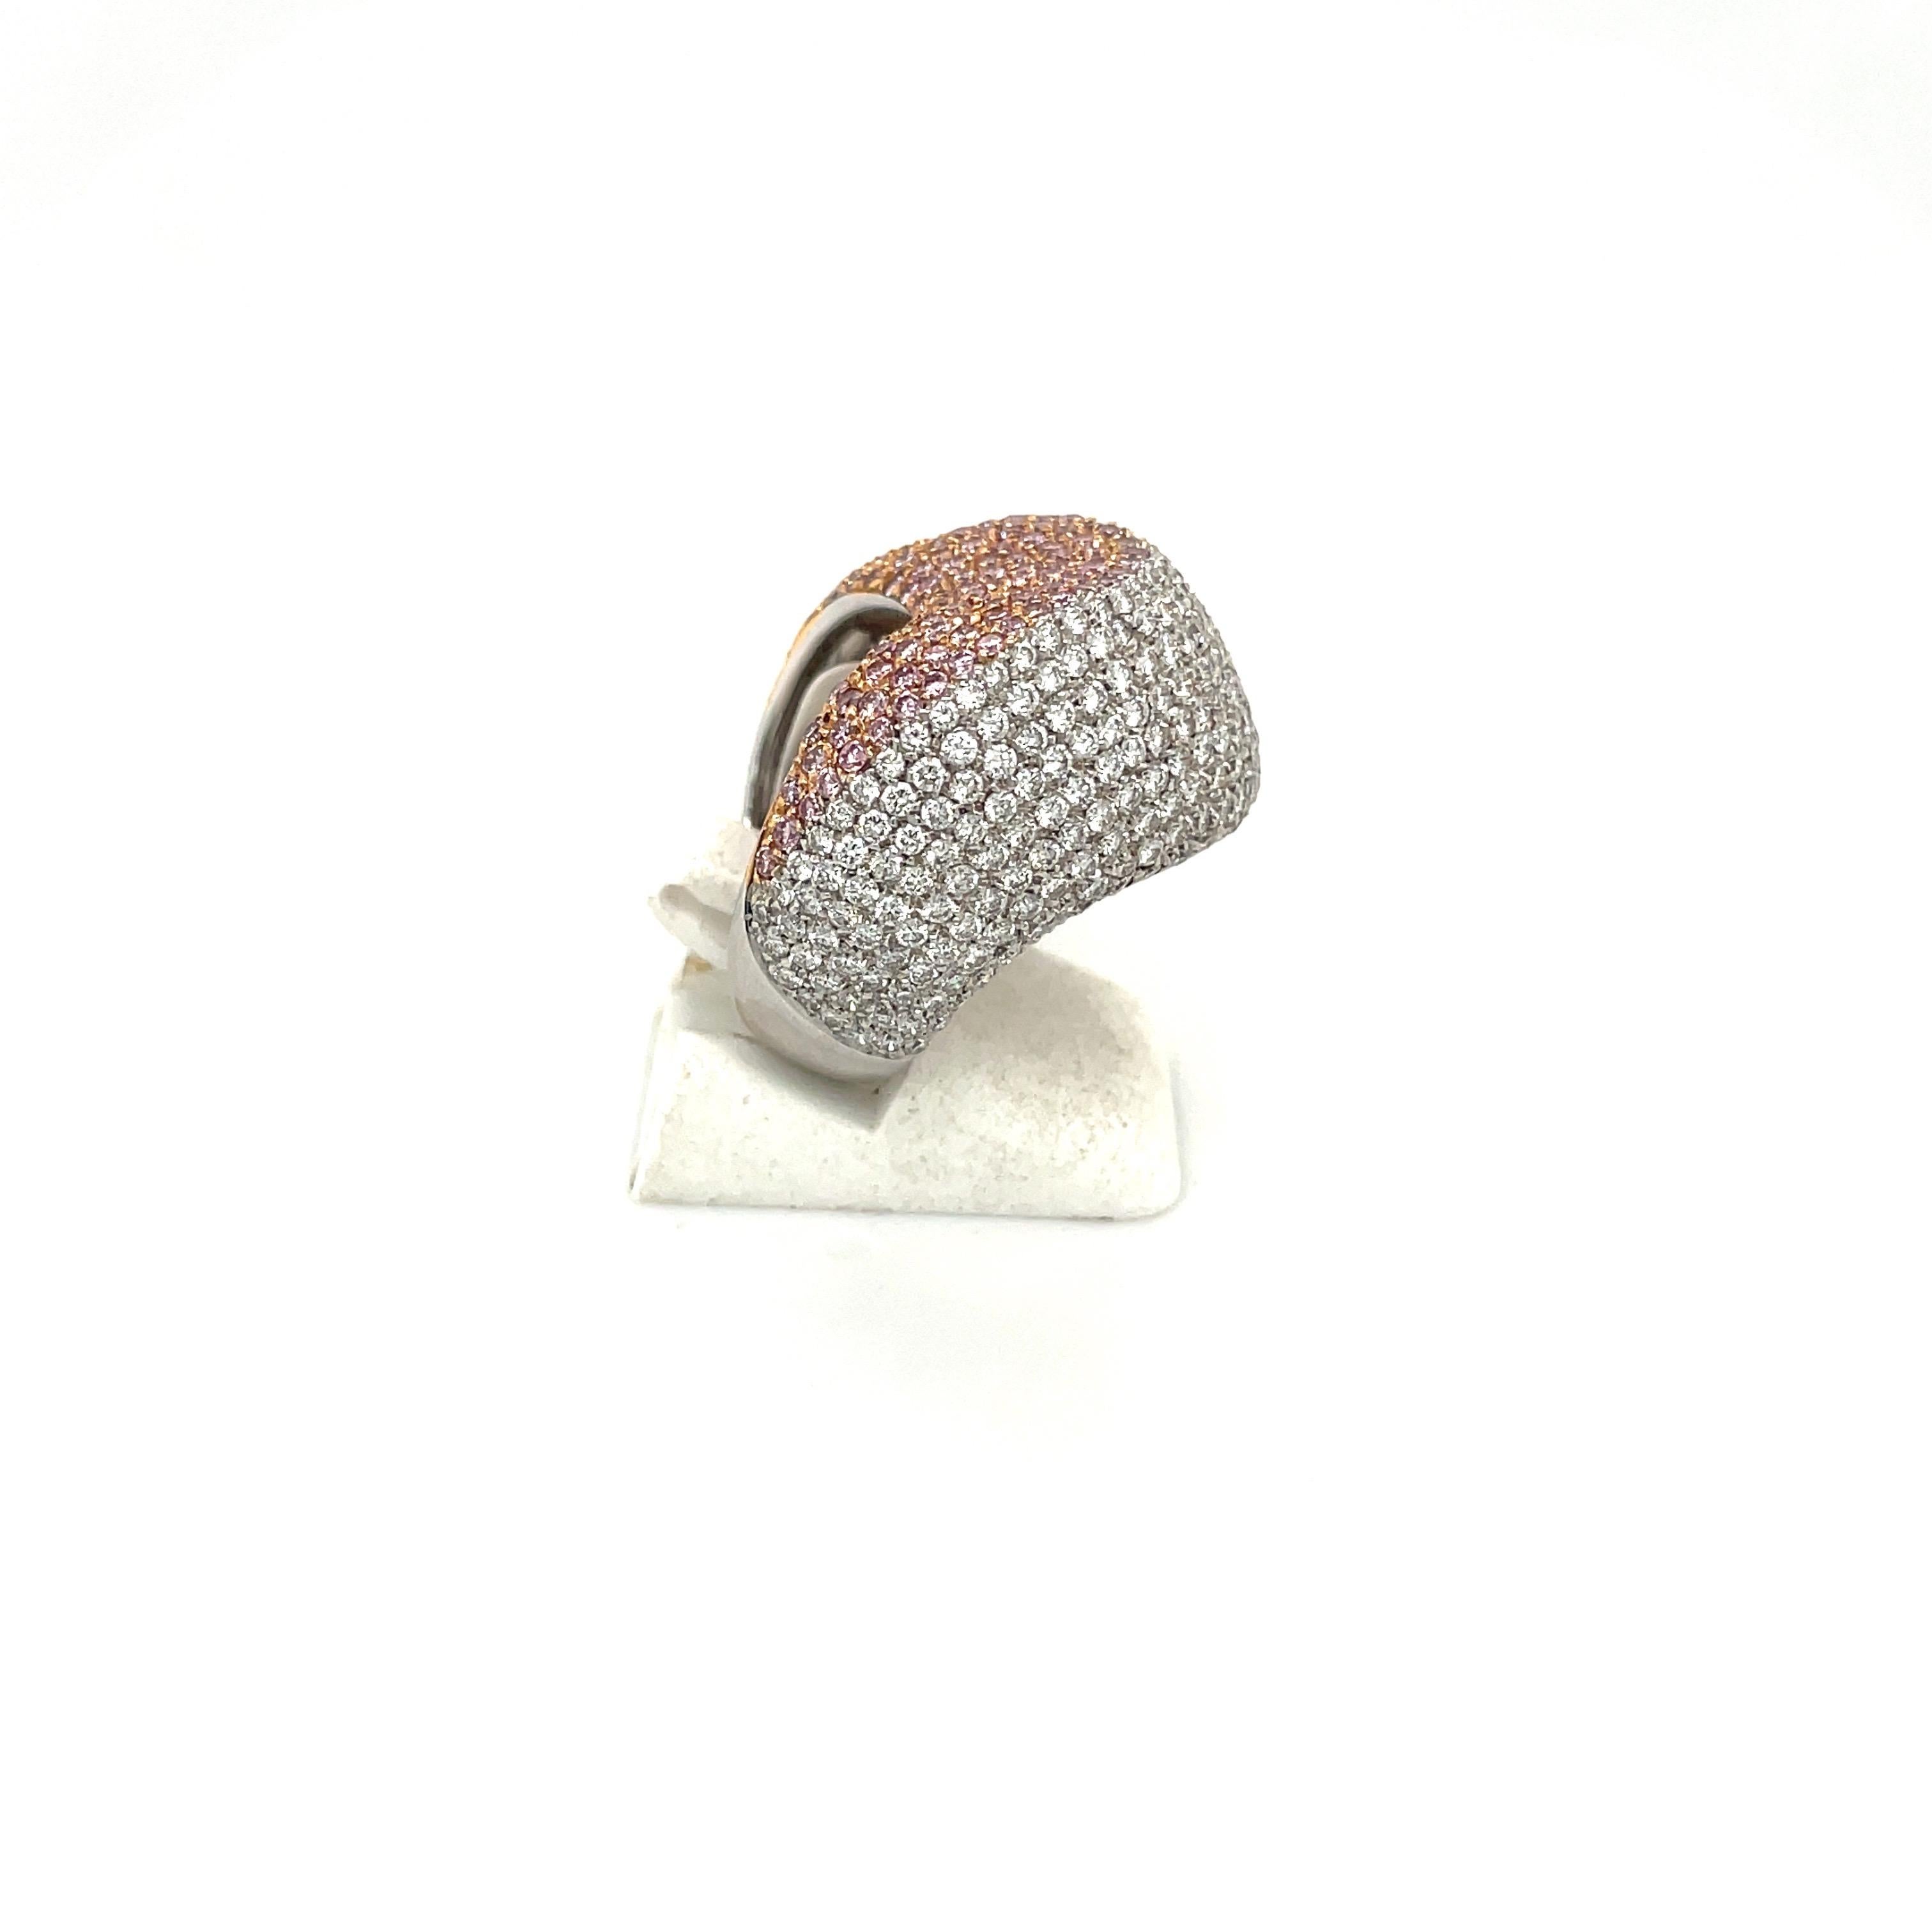 Cellini Jewelers 18KT White Gold, 2.89Ct. Pink & 1.19Ct. White Diamond Ring In New Condition For Sale In New York, NY